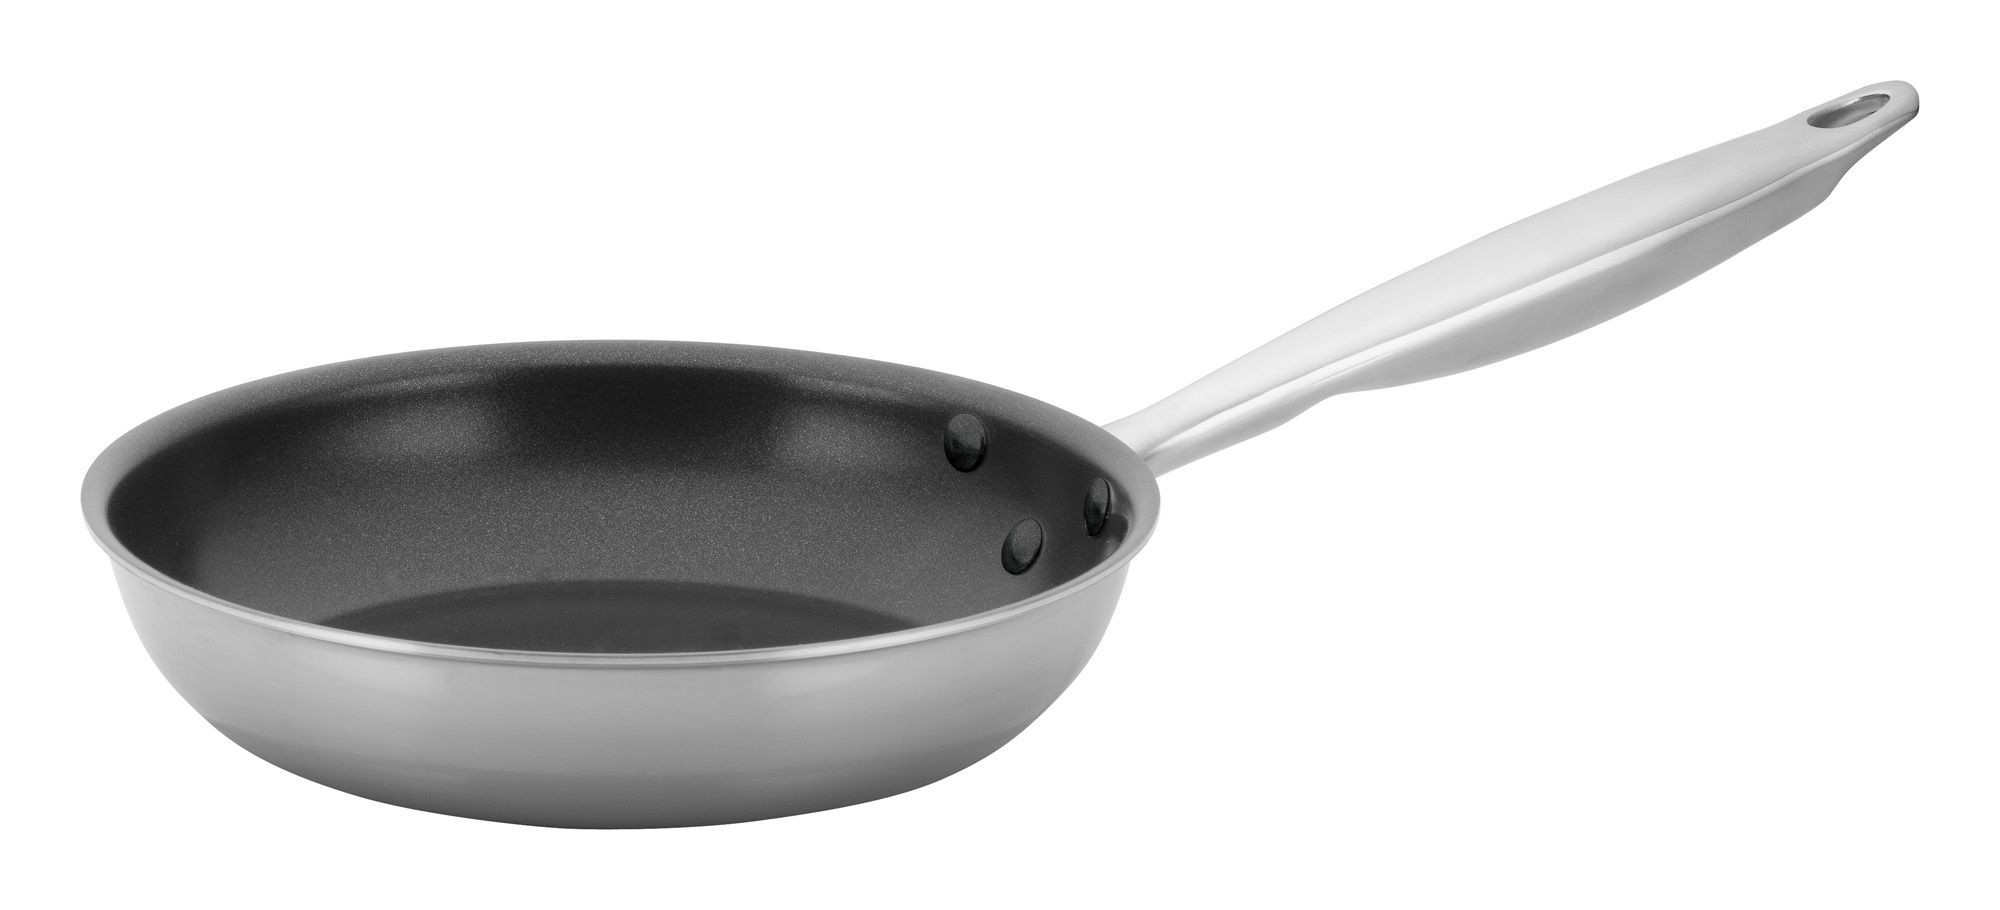 Winco TGFP-8NS Tri-Ply Excalibur Stainless Steel Non-Stick 8" Fry Pan